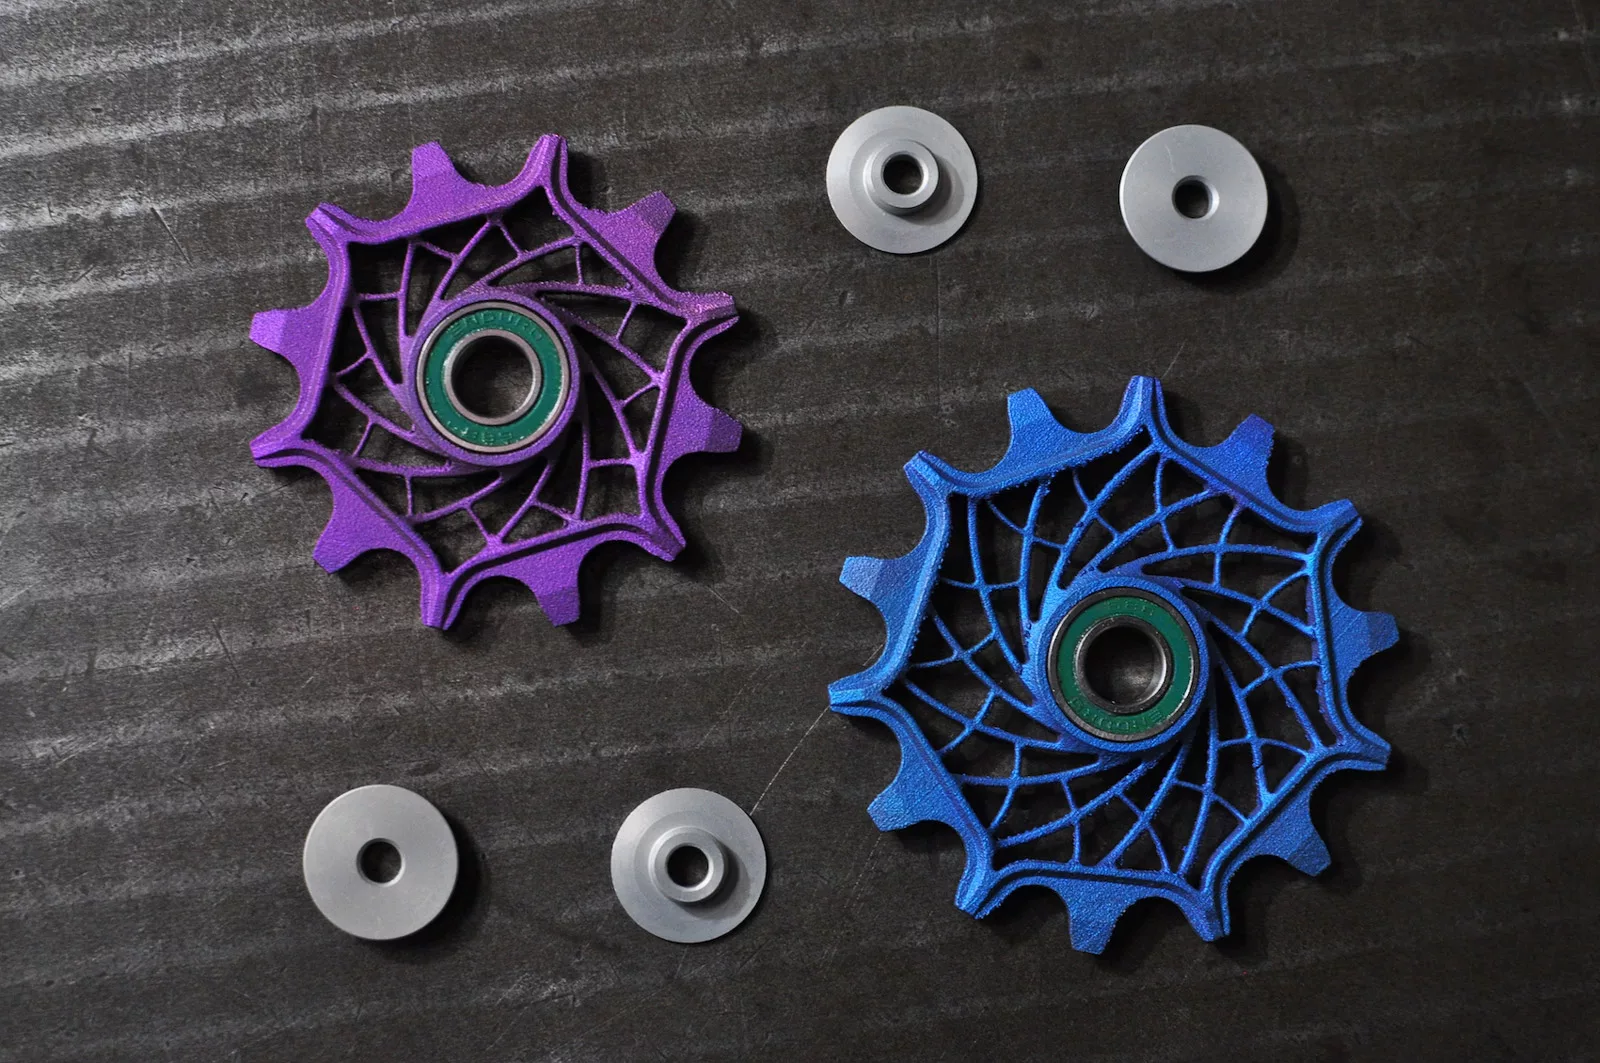 sturdy cycles 3d printed titanium jockey wheels 12t 14t upgrade almost any derailleur